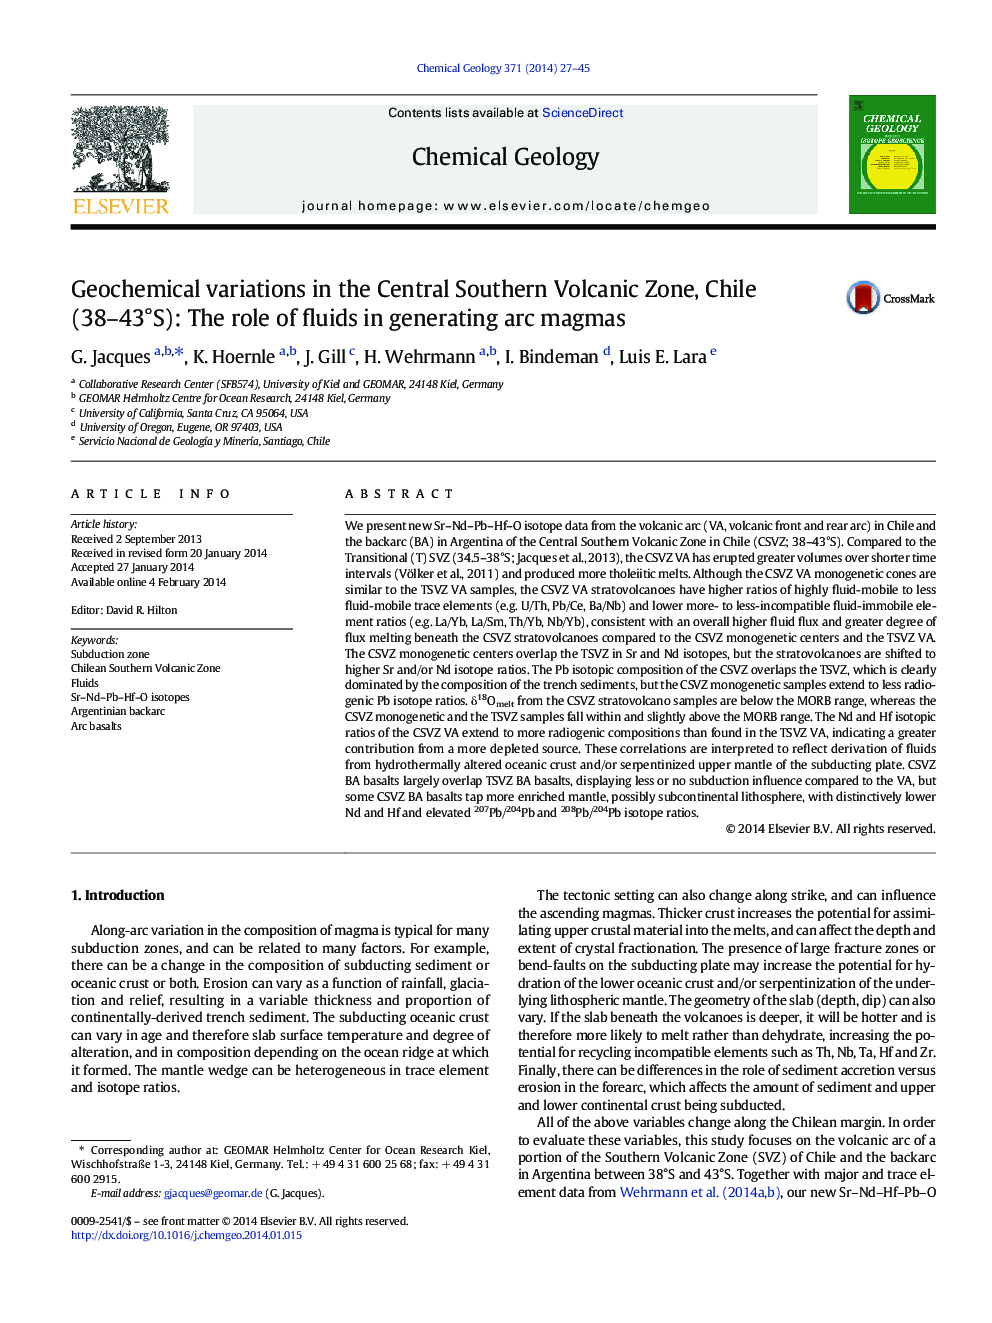 Geochemical variations in the Central Southern Volcanic Zone, Chile (38–43°S): The role of fluids in generating arc magmas